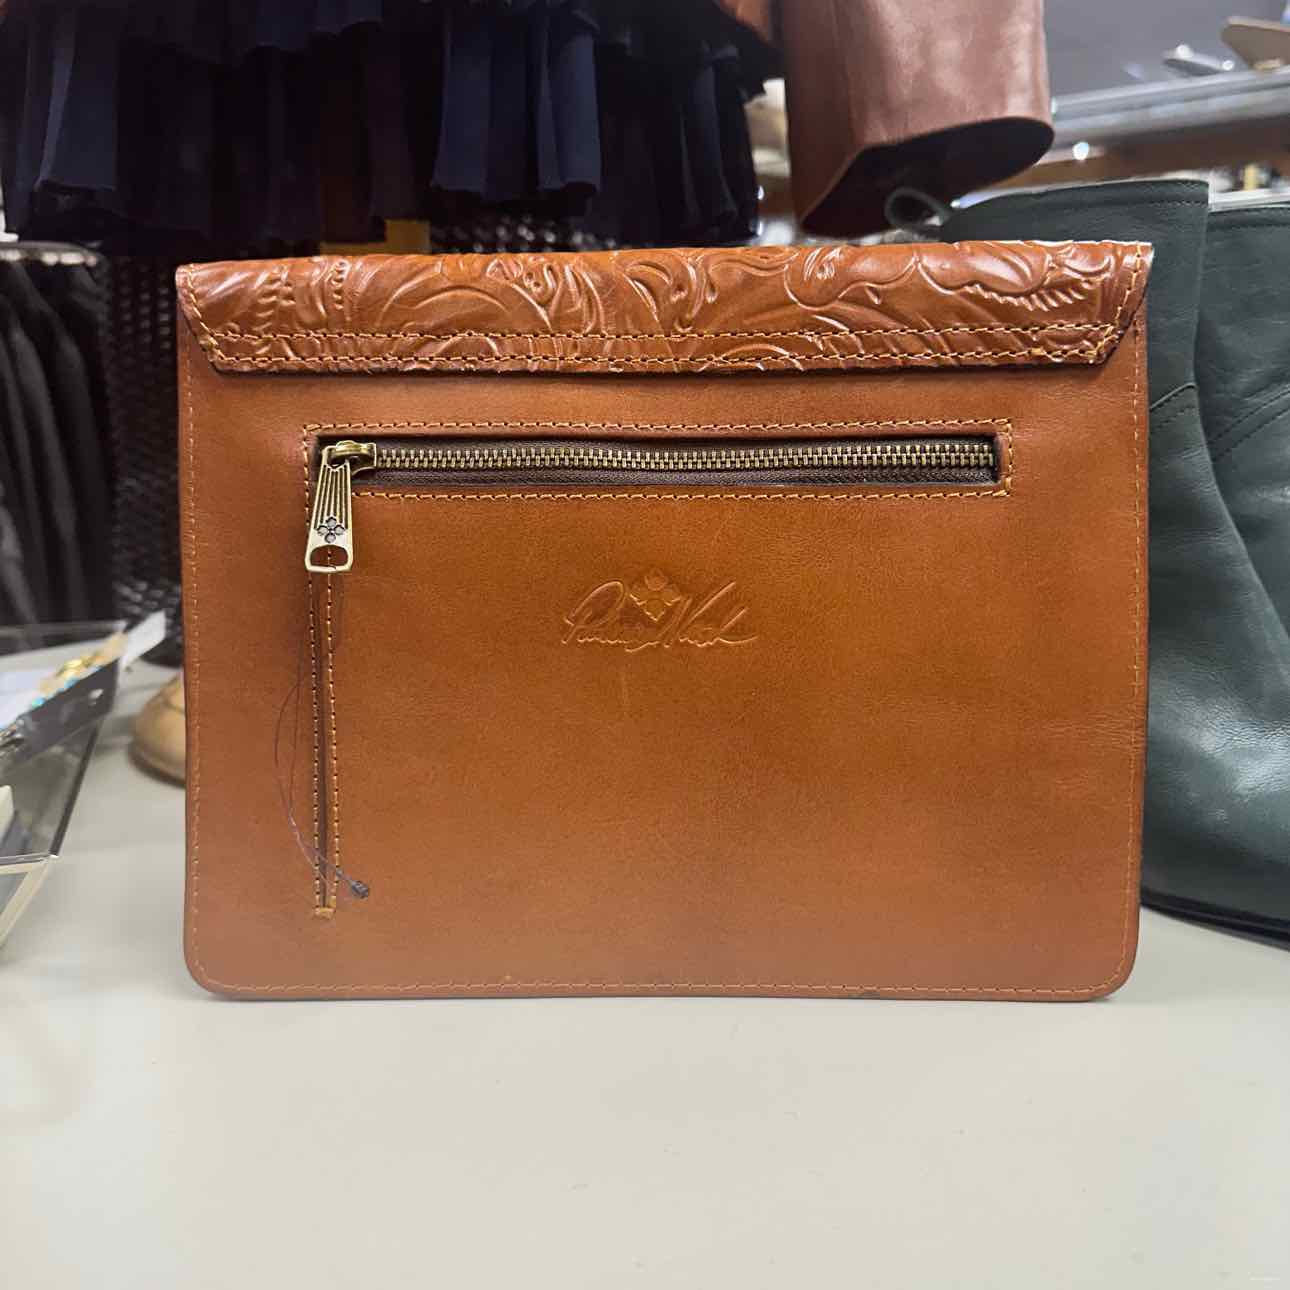 brown leather clutch